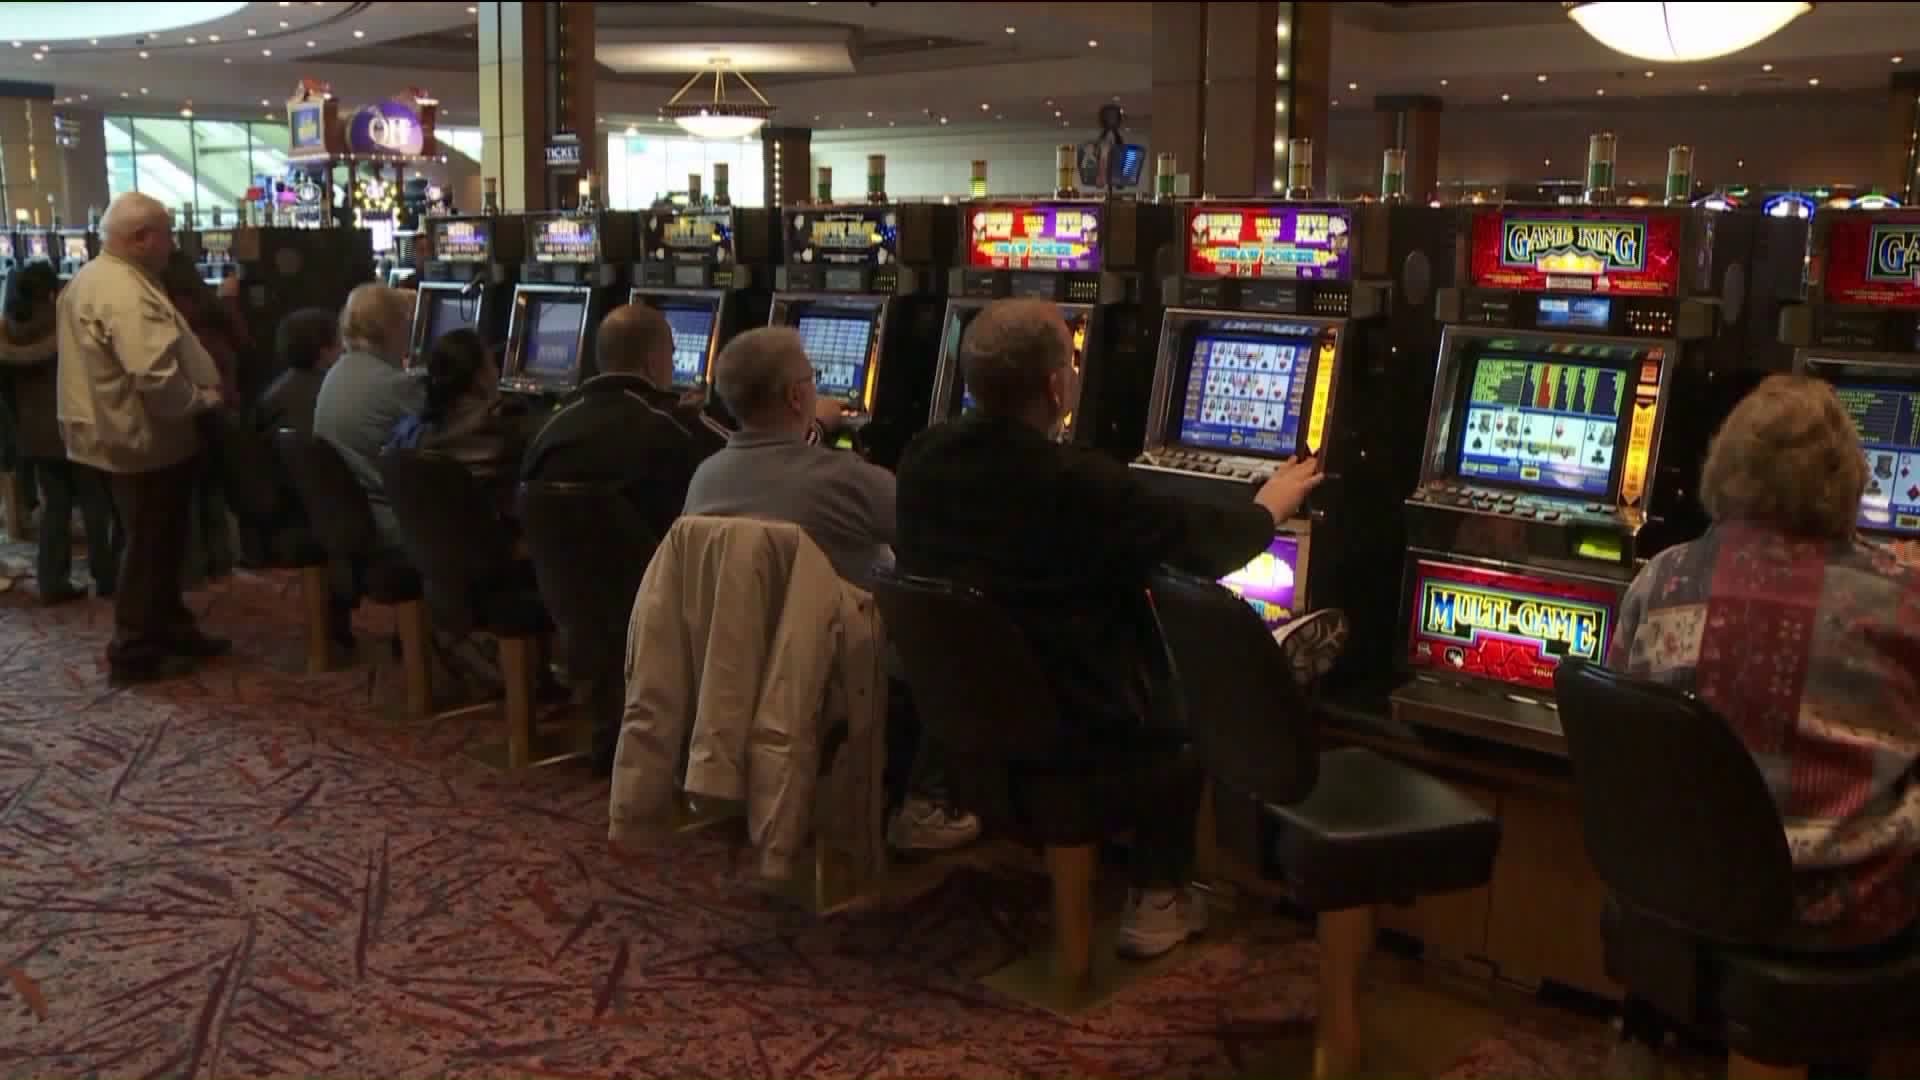 East Windsor rolls out proposed agreement for third Connecticut casino